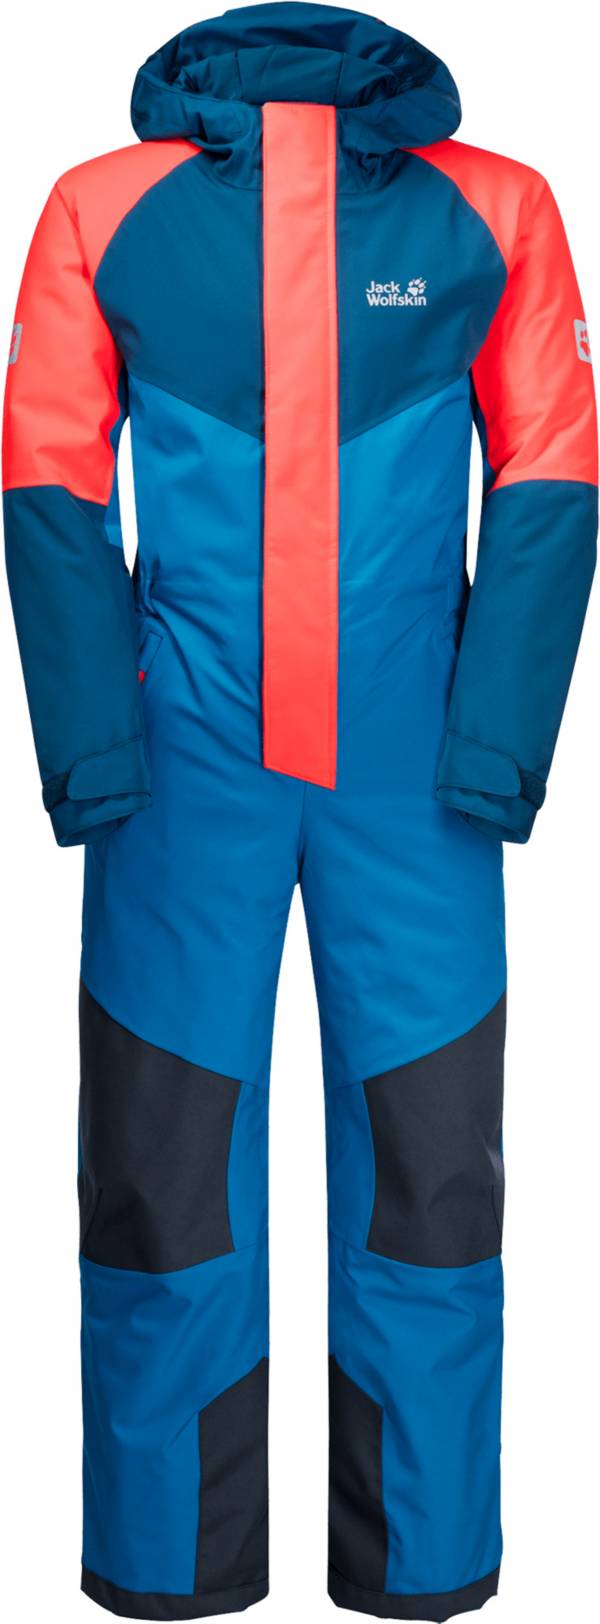 Jack Wolfskin Youth Great Snow Snowsuit product image